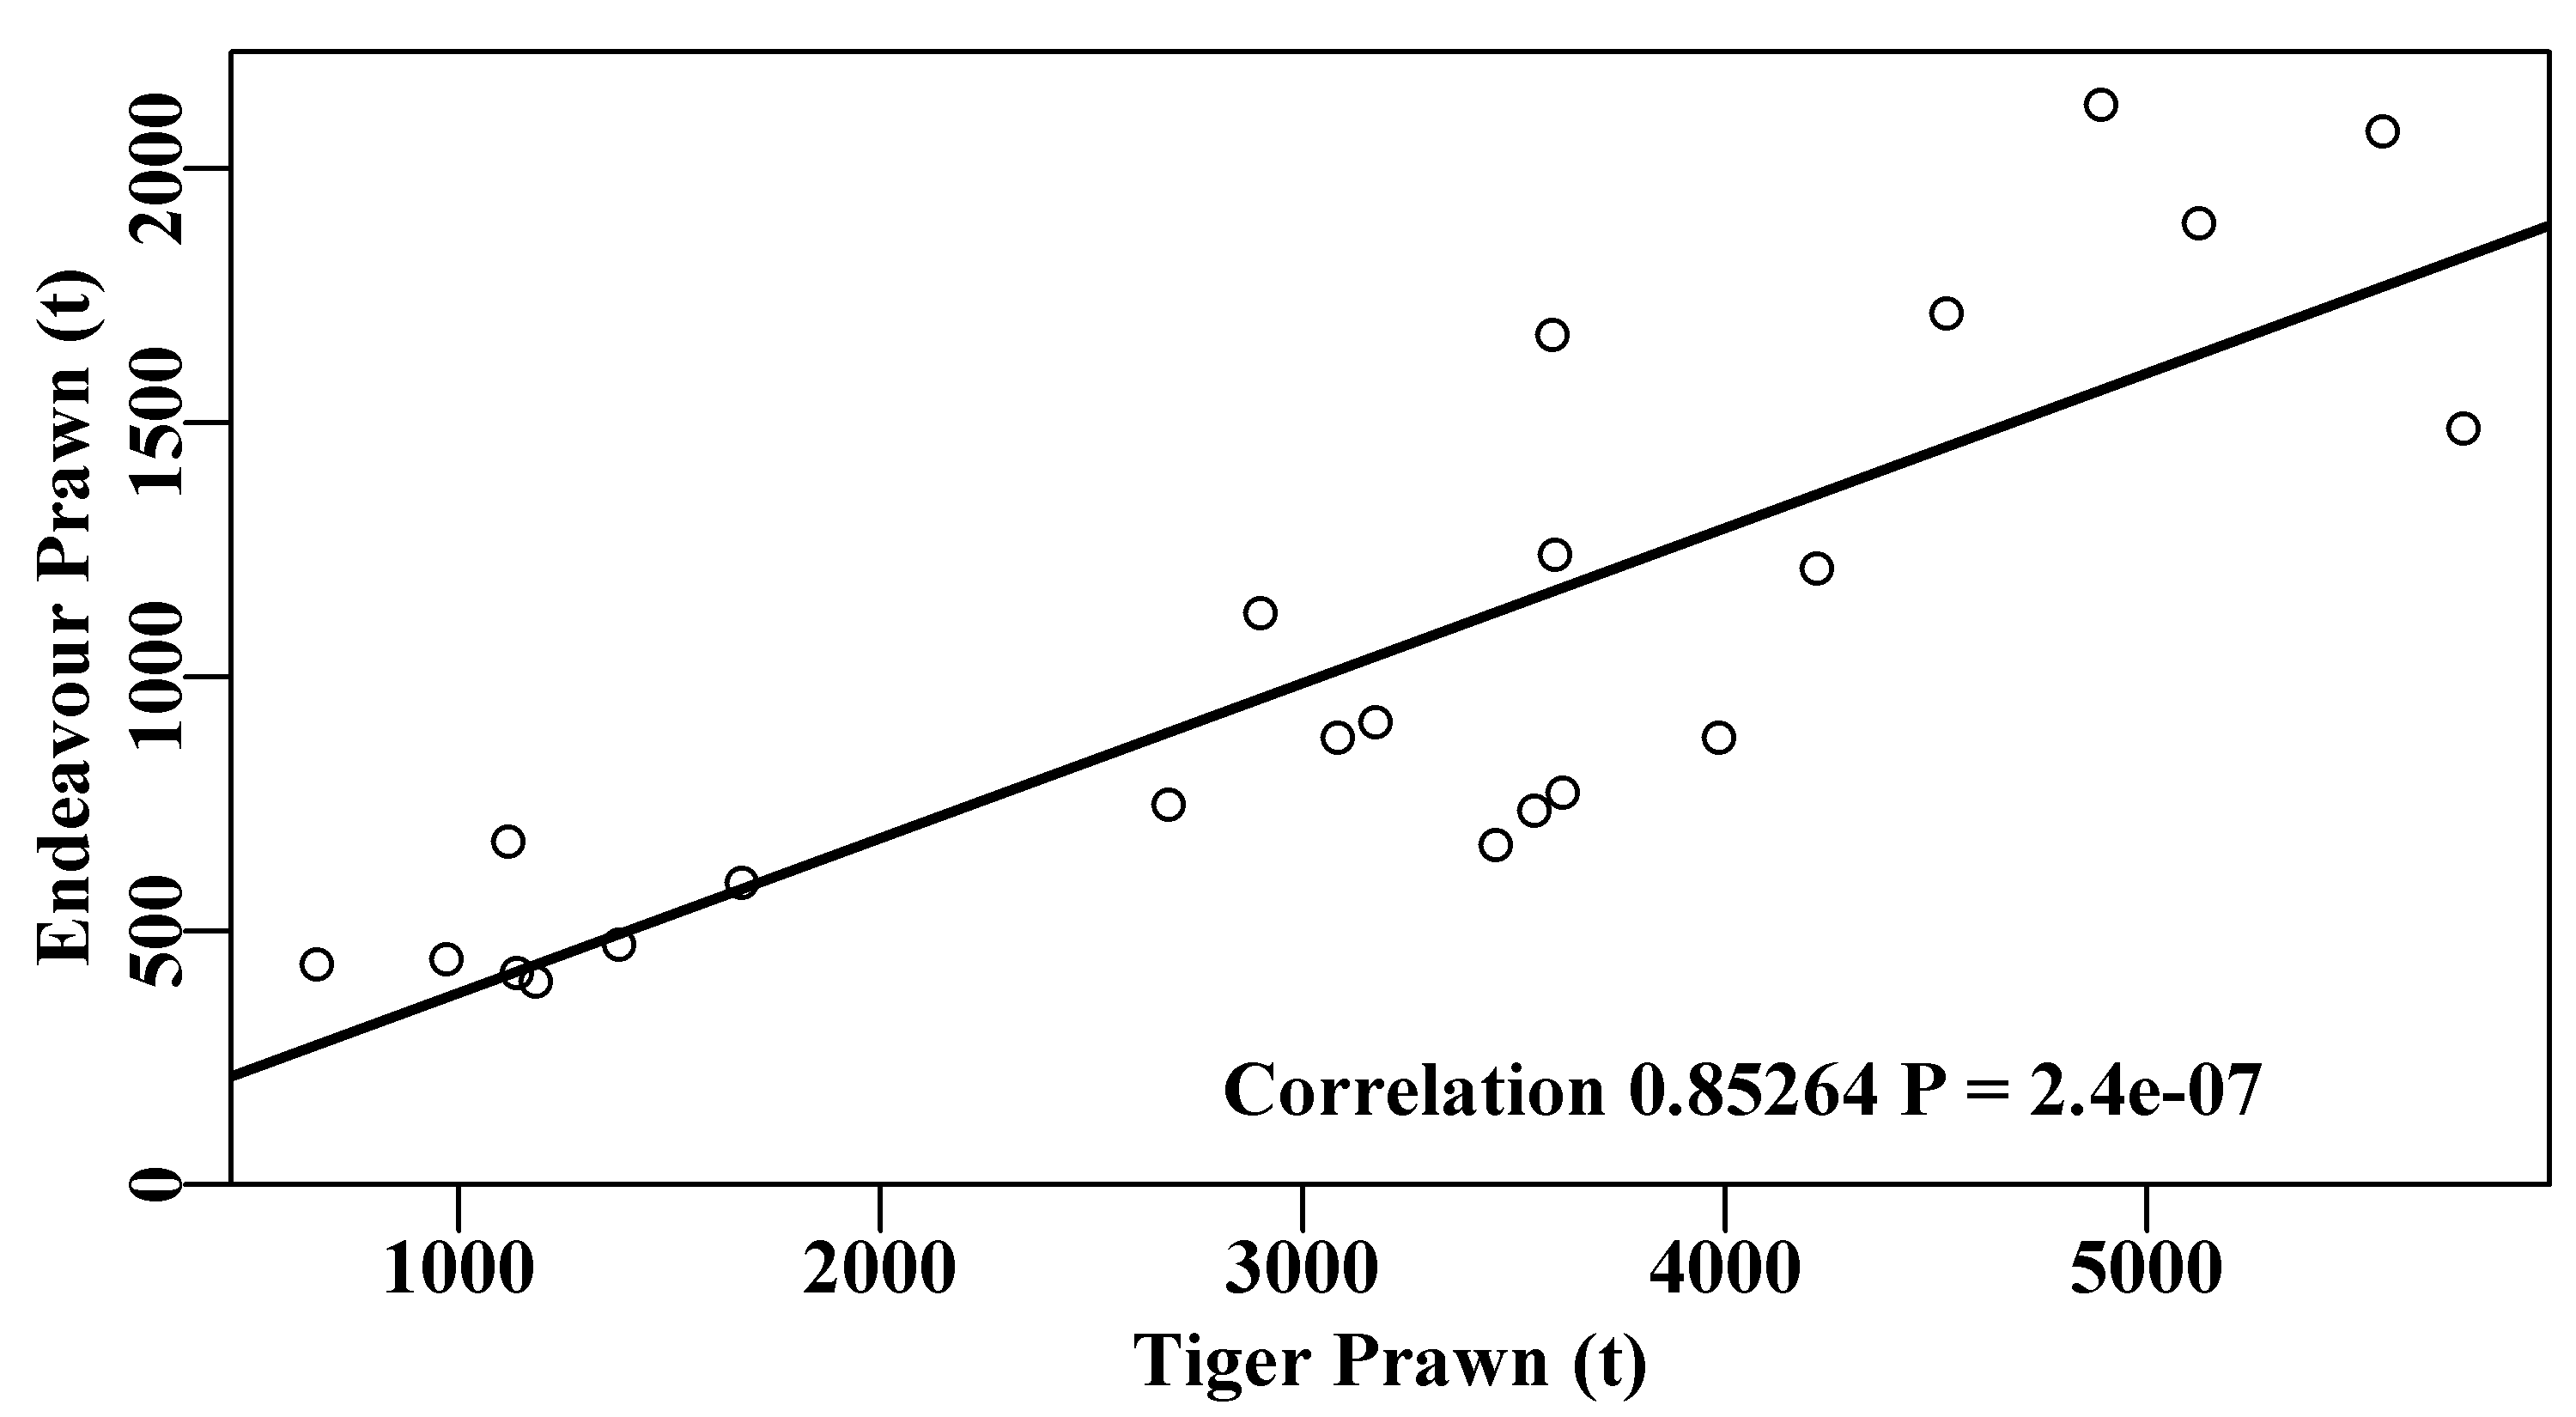 The positive correlation between the catches of endeavour and tiger prawns in the Australian Northern Prawn Fishery between 1970 - 1992 (data from Robins and Somers, 1994).